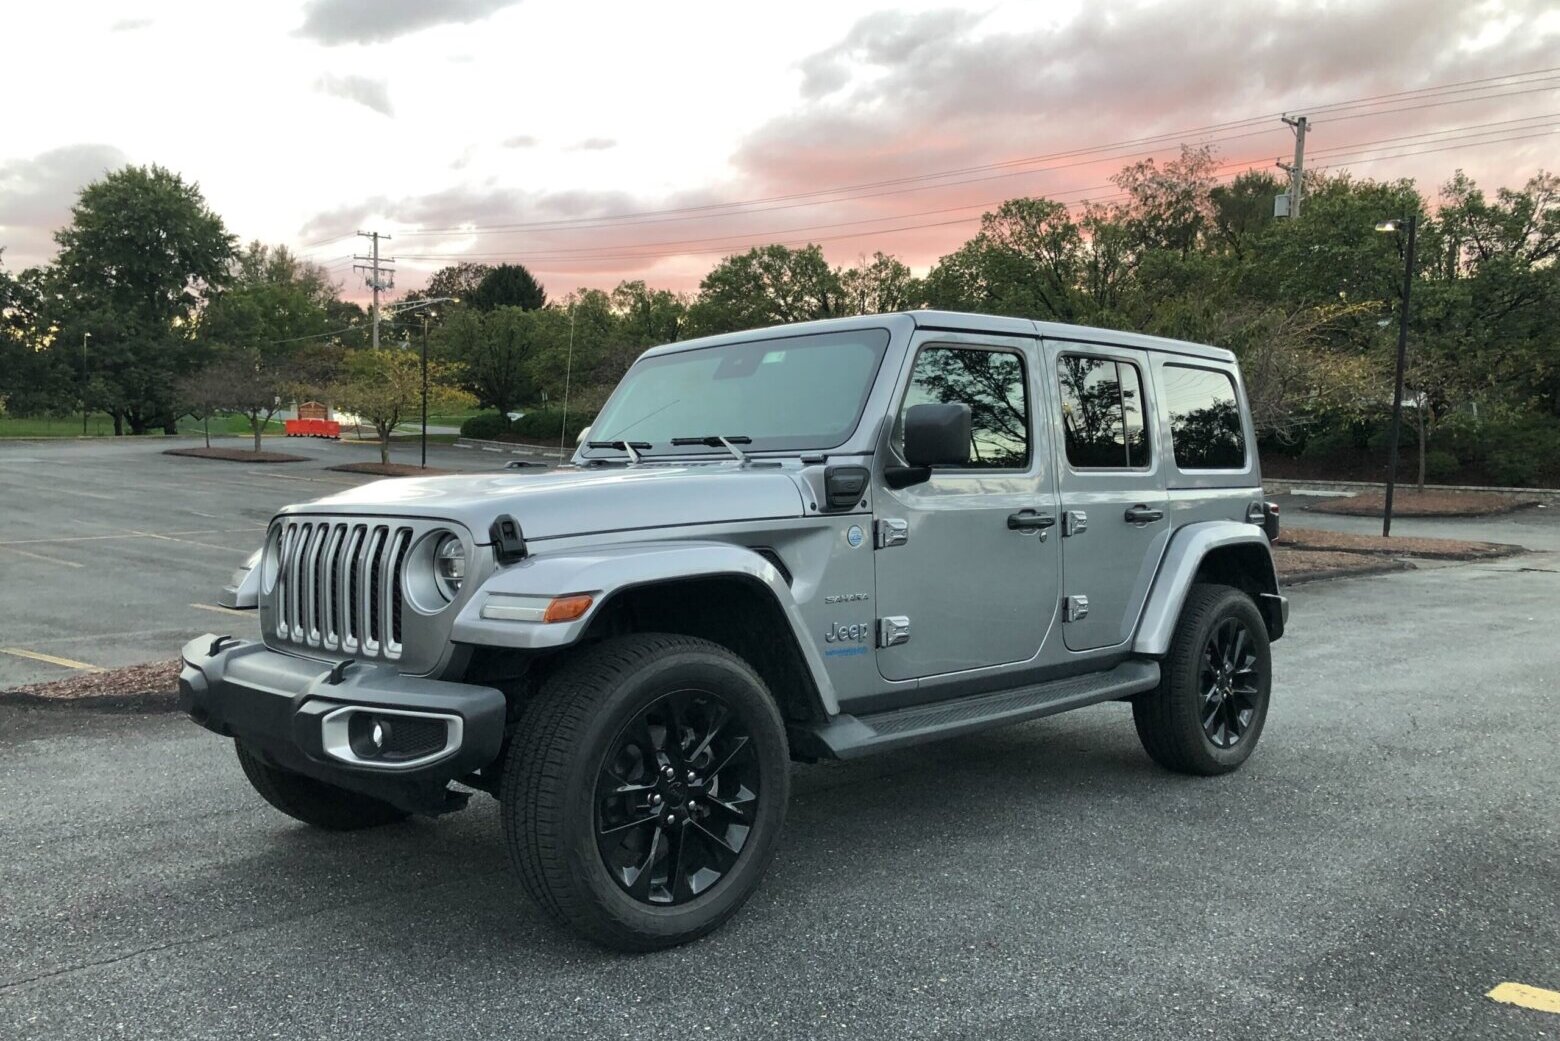 Car Review: Jeep Wrangler Unlimited Sahara 4xe has electric-only driving,  keeps off-road cred - WTOP News